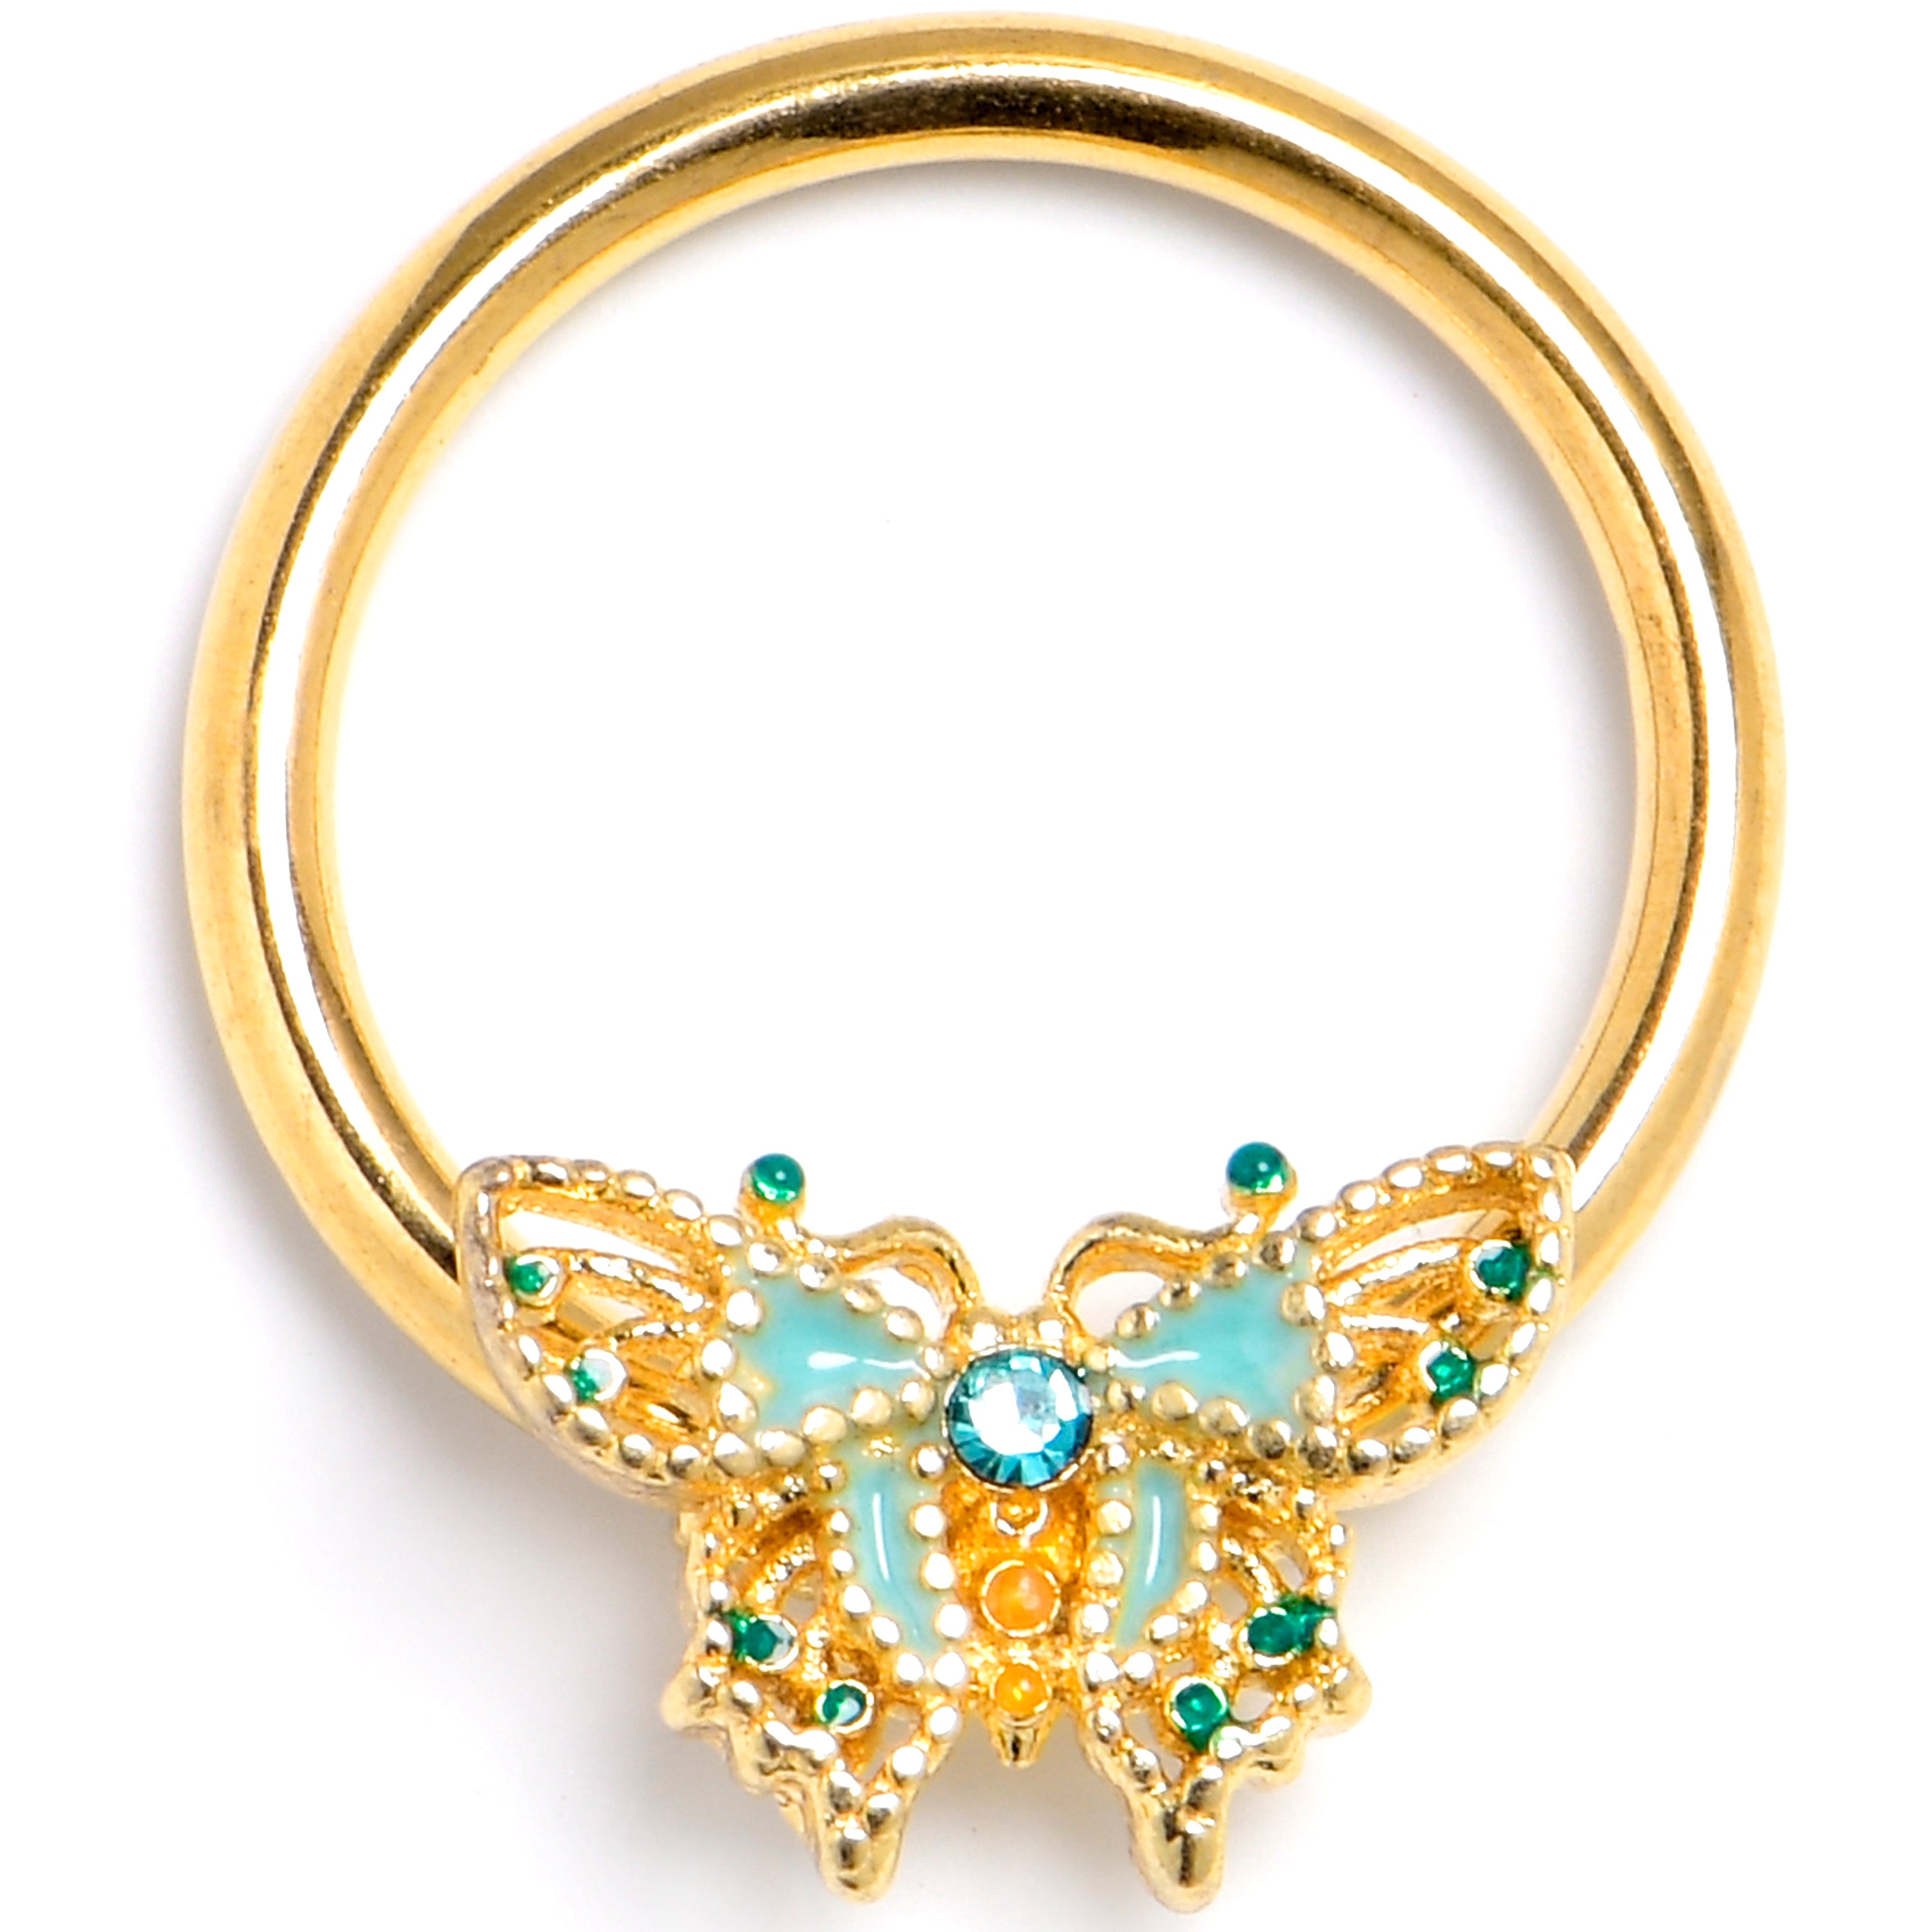 16 Gauge 3/8 Blue Gem Gold Tone Rococo Butterfly BCR Captive Ring